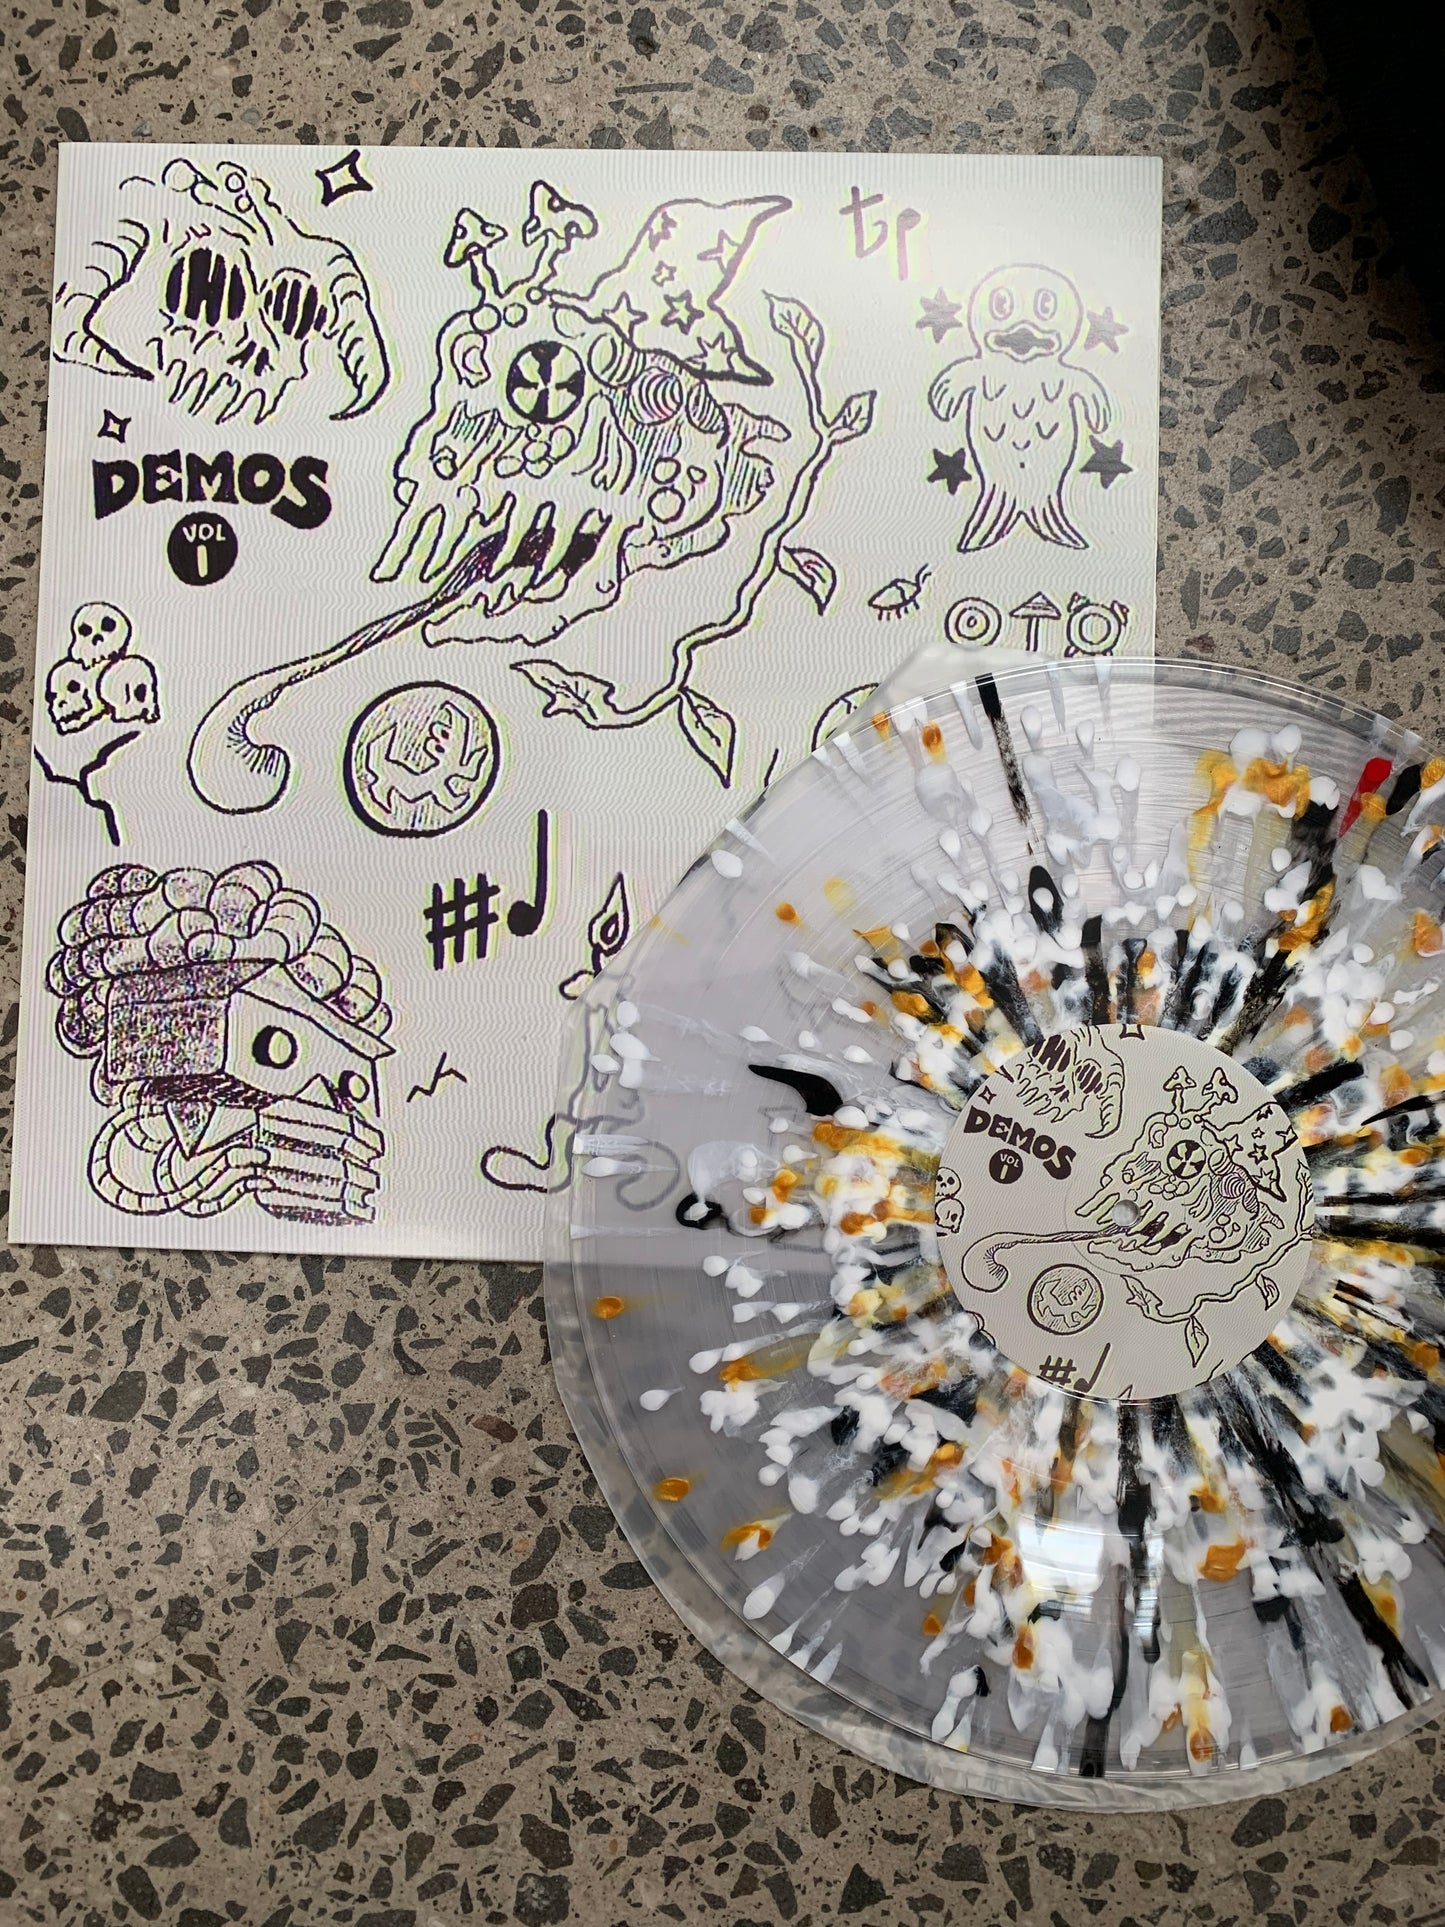 DEMOS VOL. 1. "Music To Kill Bad People To" Clear With Black and Gold Splatter 12" Vinyl (Bootleg by Magnetic South)